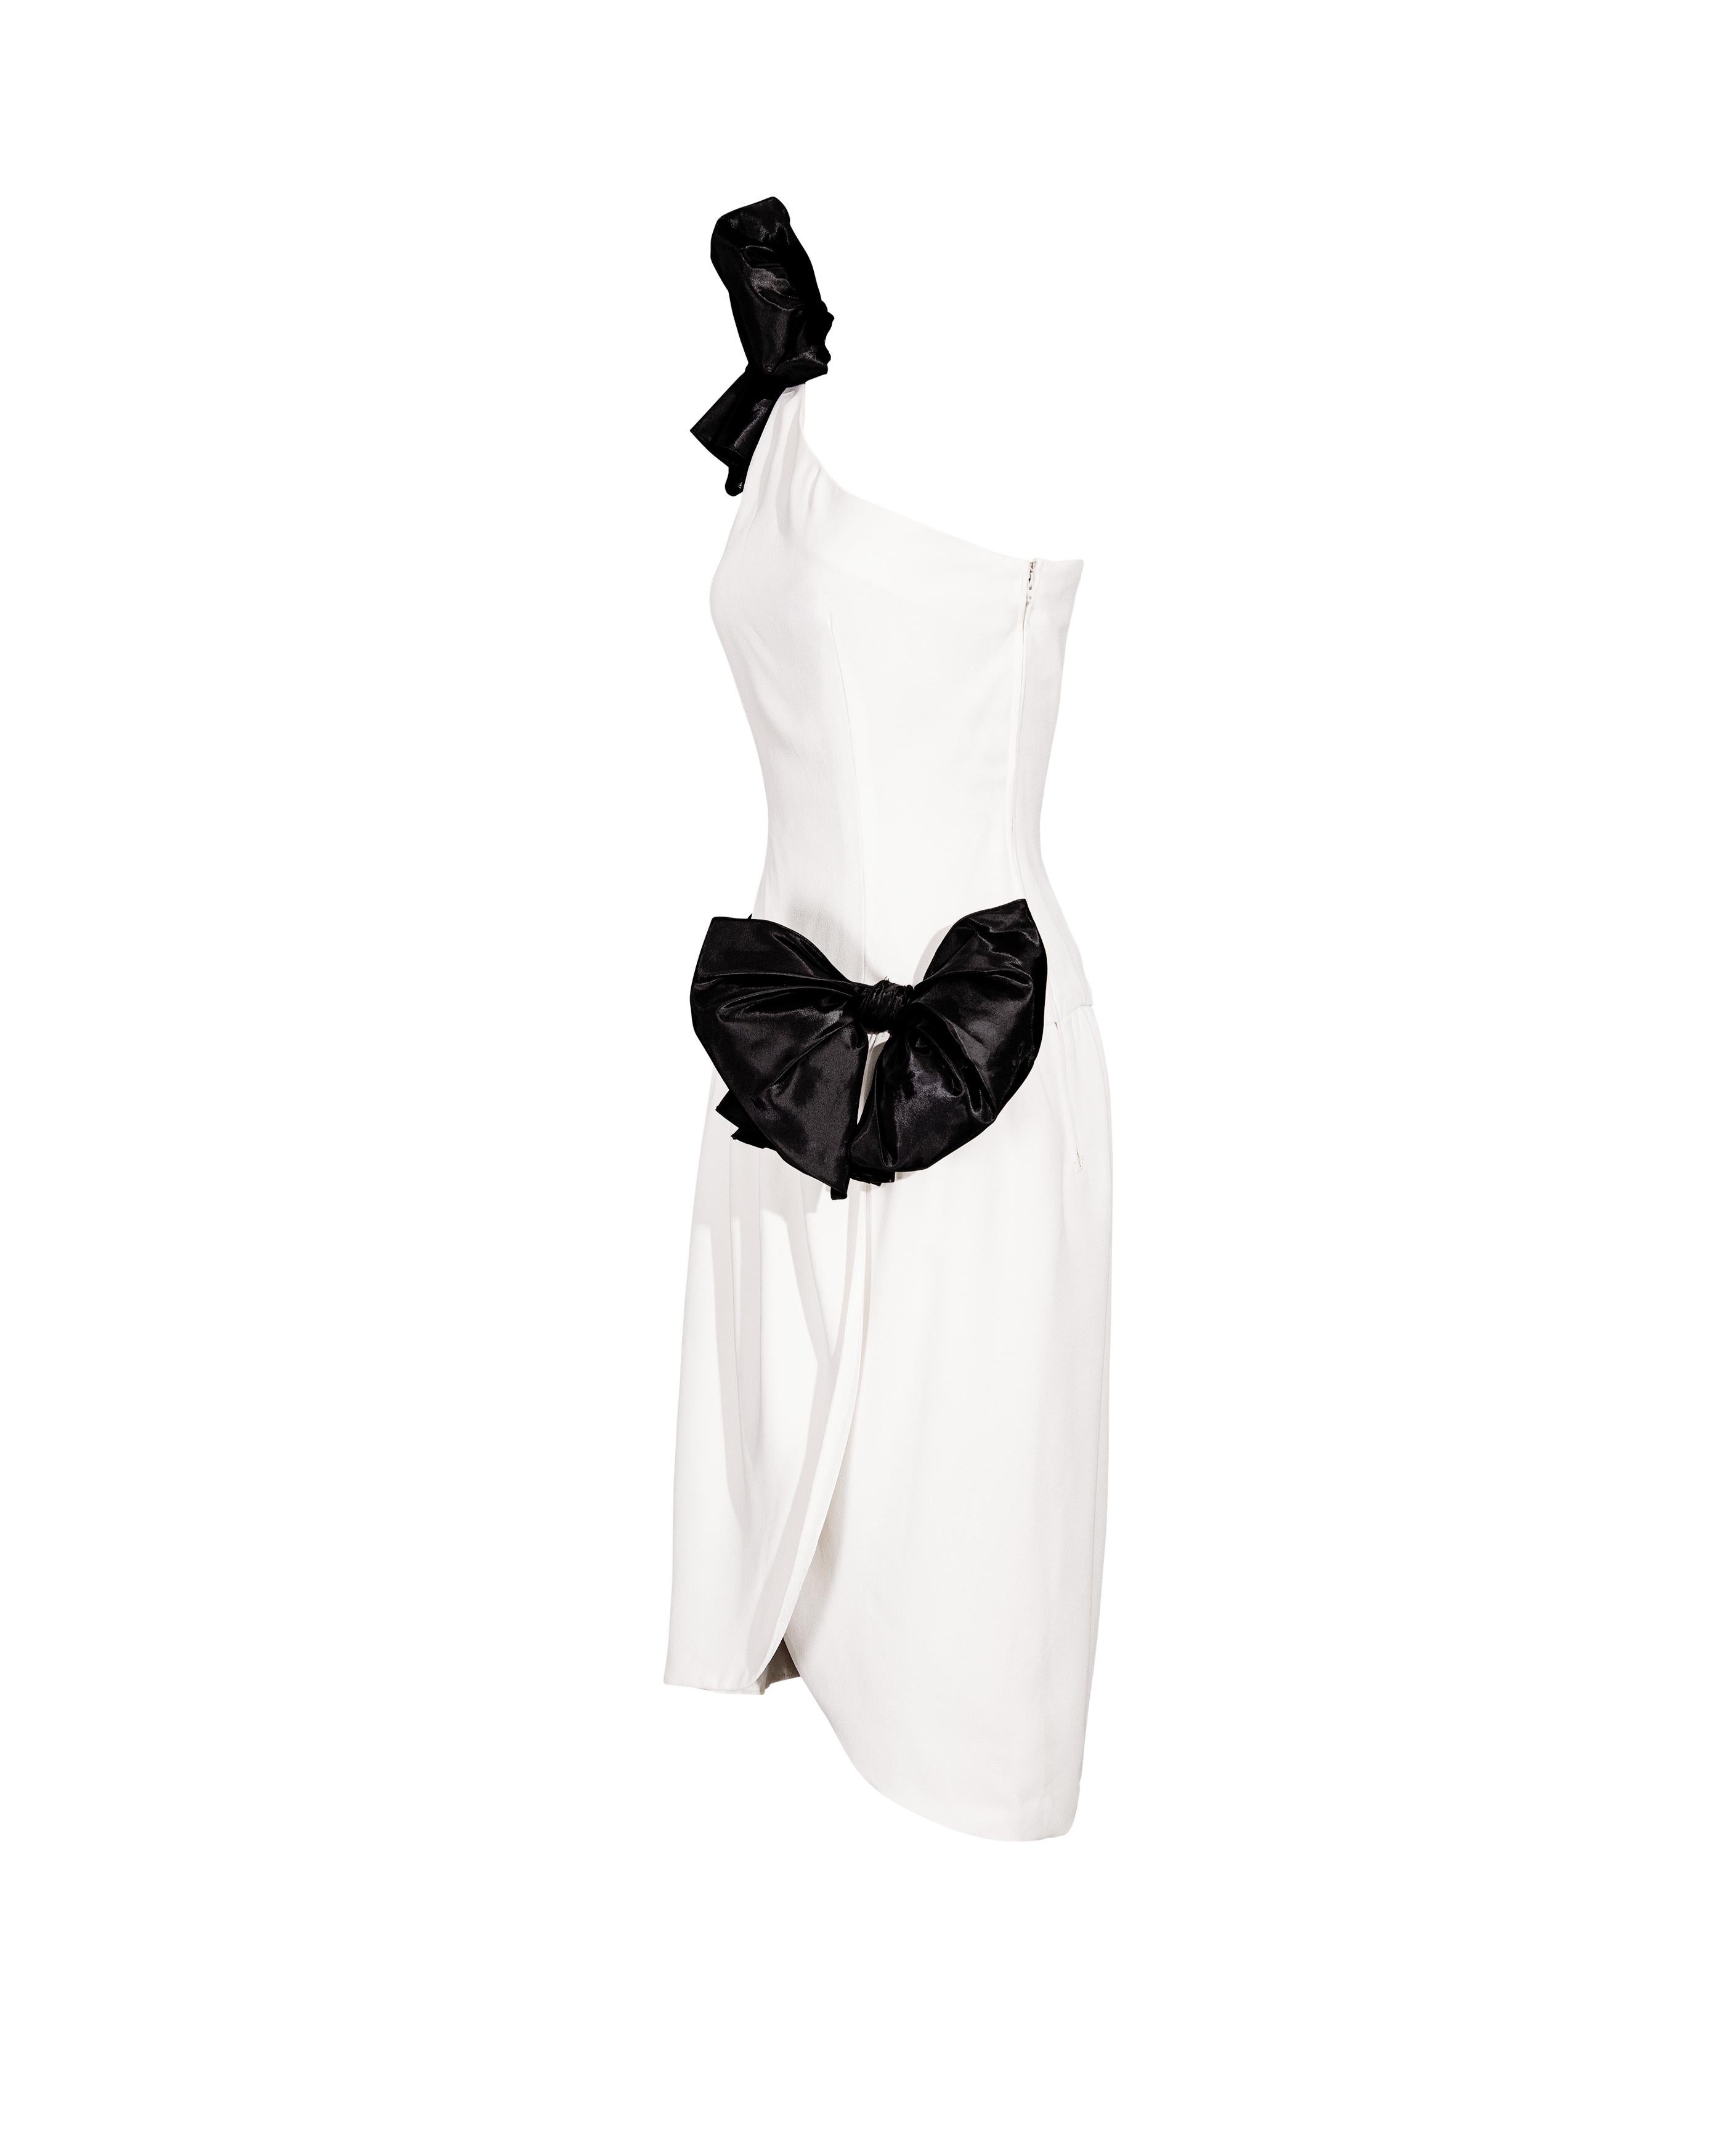 1983 Oscar de la Renta White Asymmetrical Above-Knee Dress with Bows In Excellent Condition For Sale In North Hollywood, CA